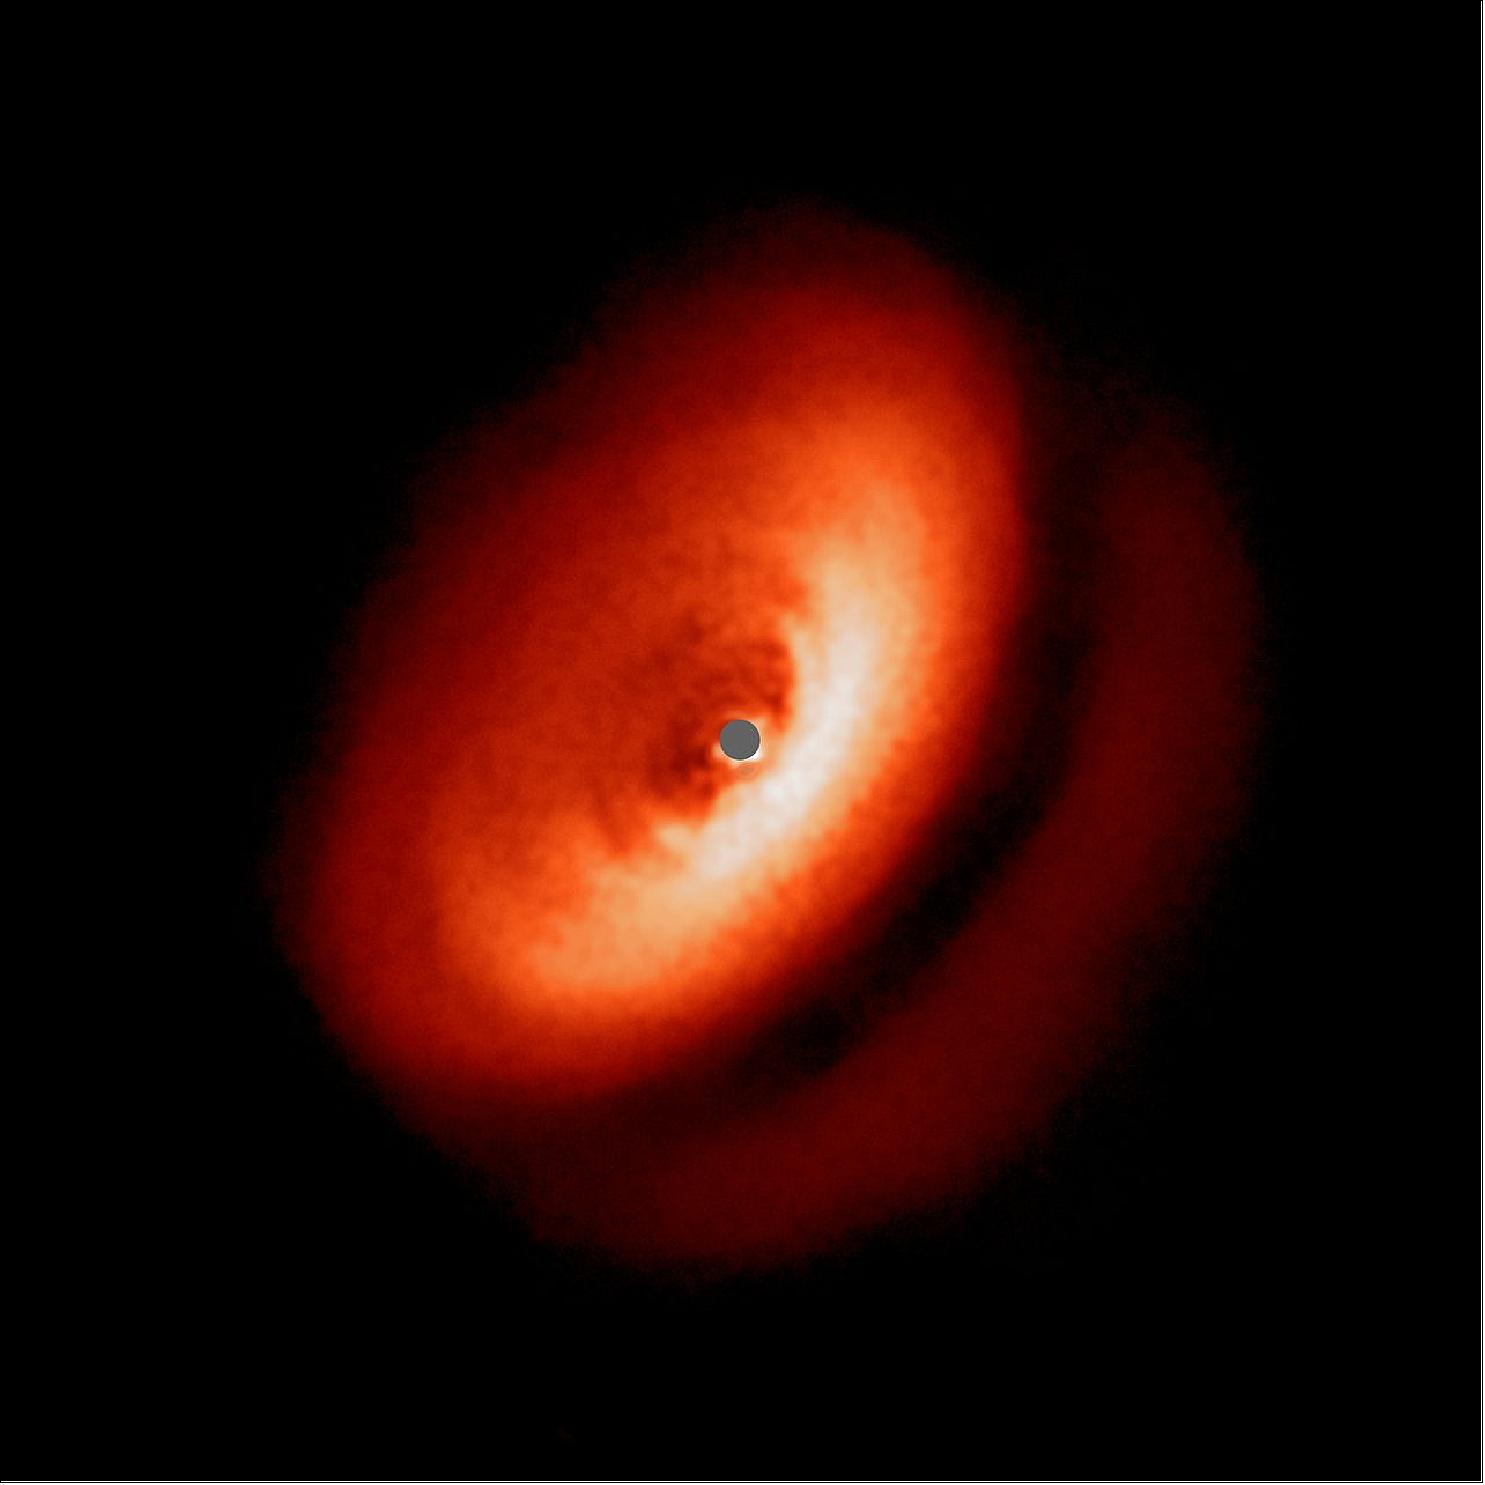 Figure 73: This spectacular image from the SPHERE instrument on ESO's Very Large Telescope shows the dusty disc around the young star IM Lupi in finer detail than ever before (image credit: ESO/H. Avenhaus et al./DARTT-S collaboration) 108)